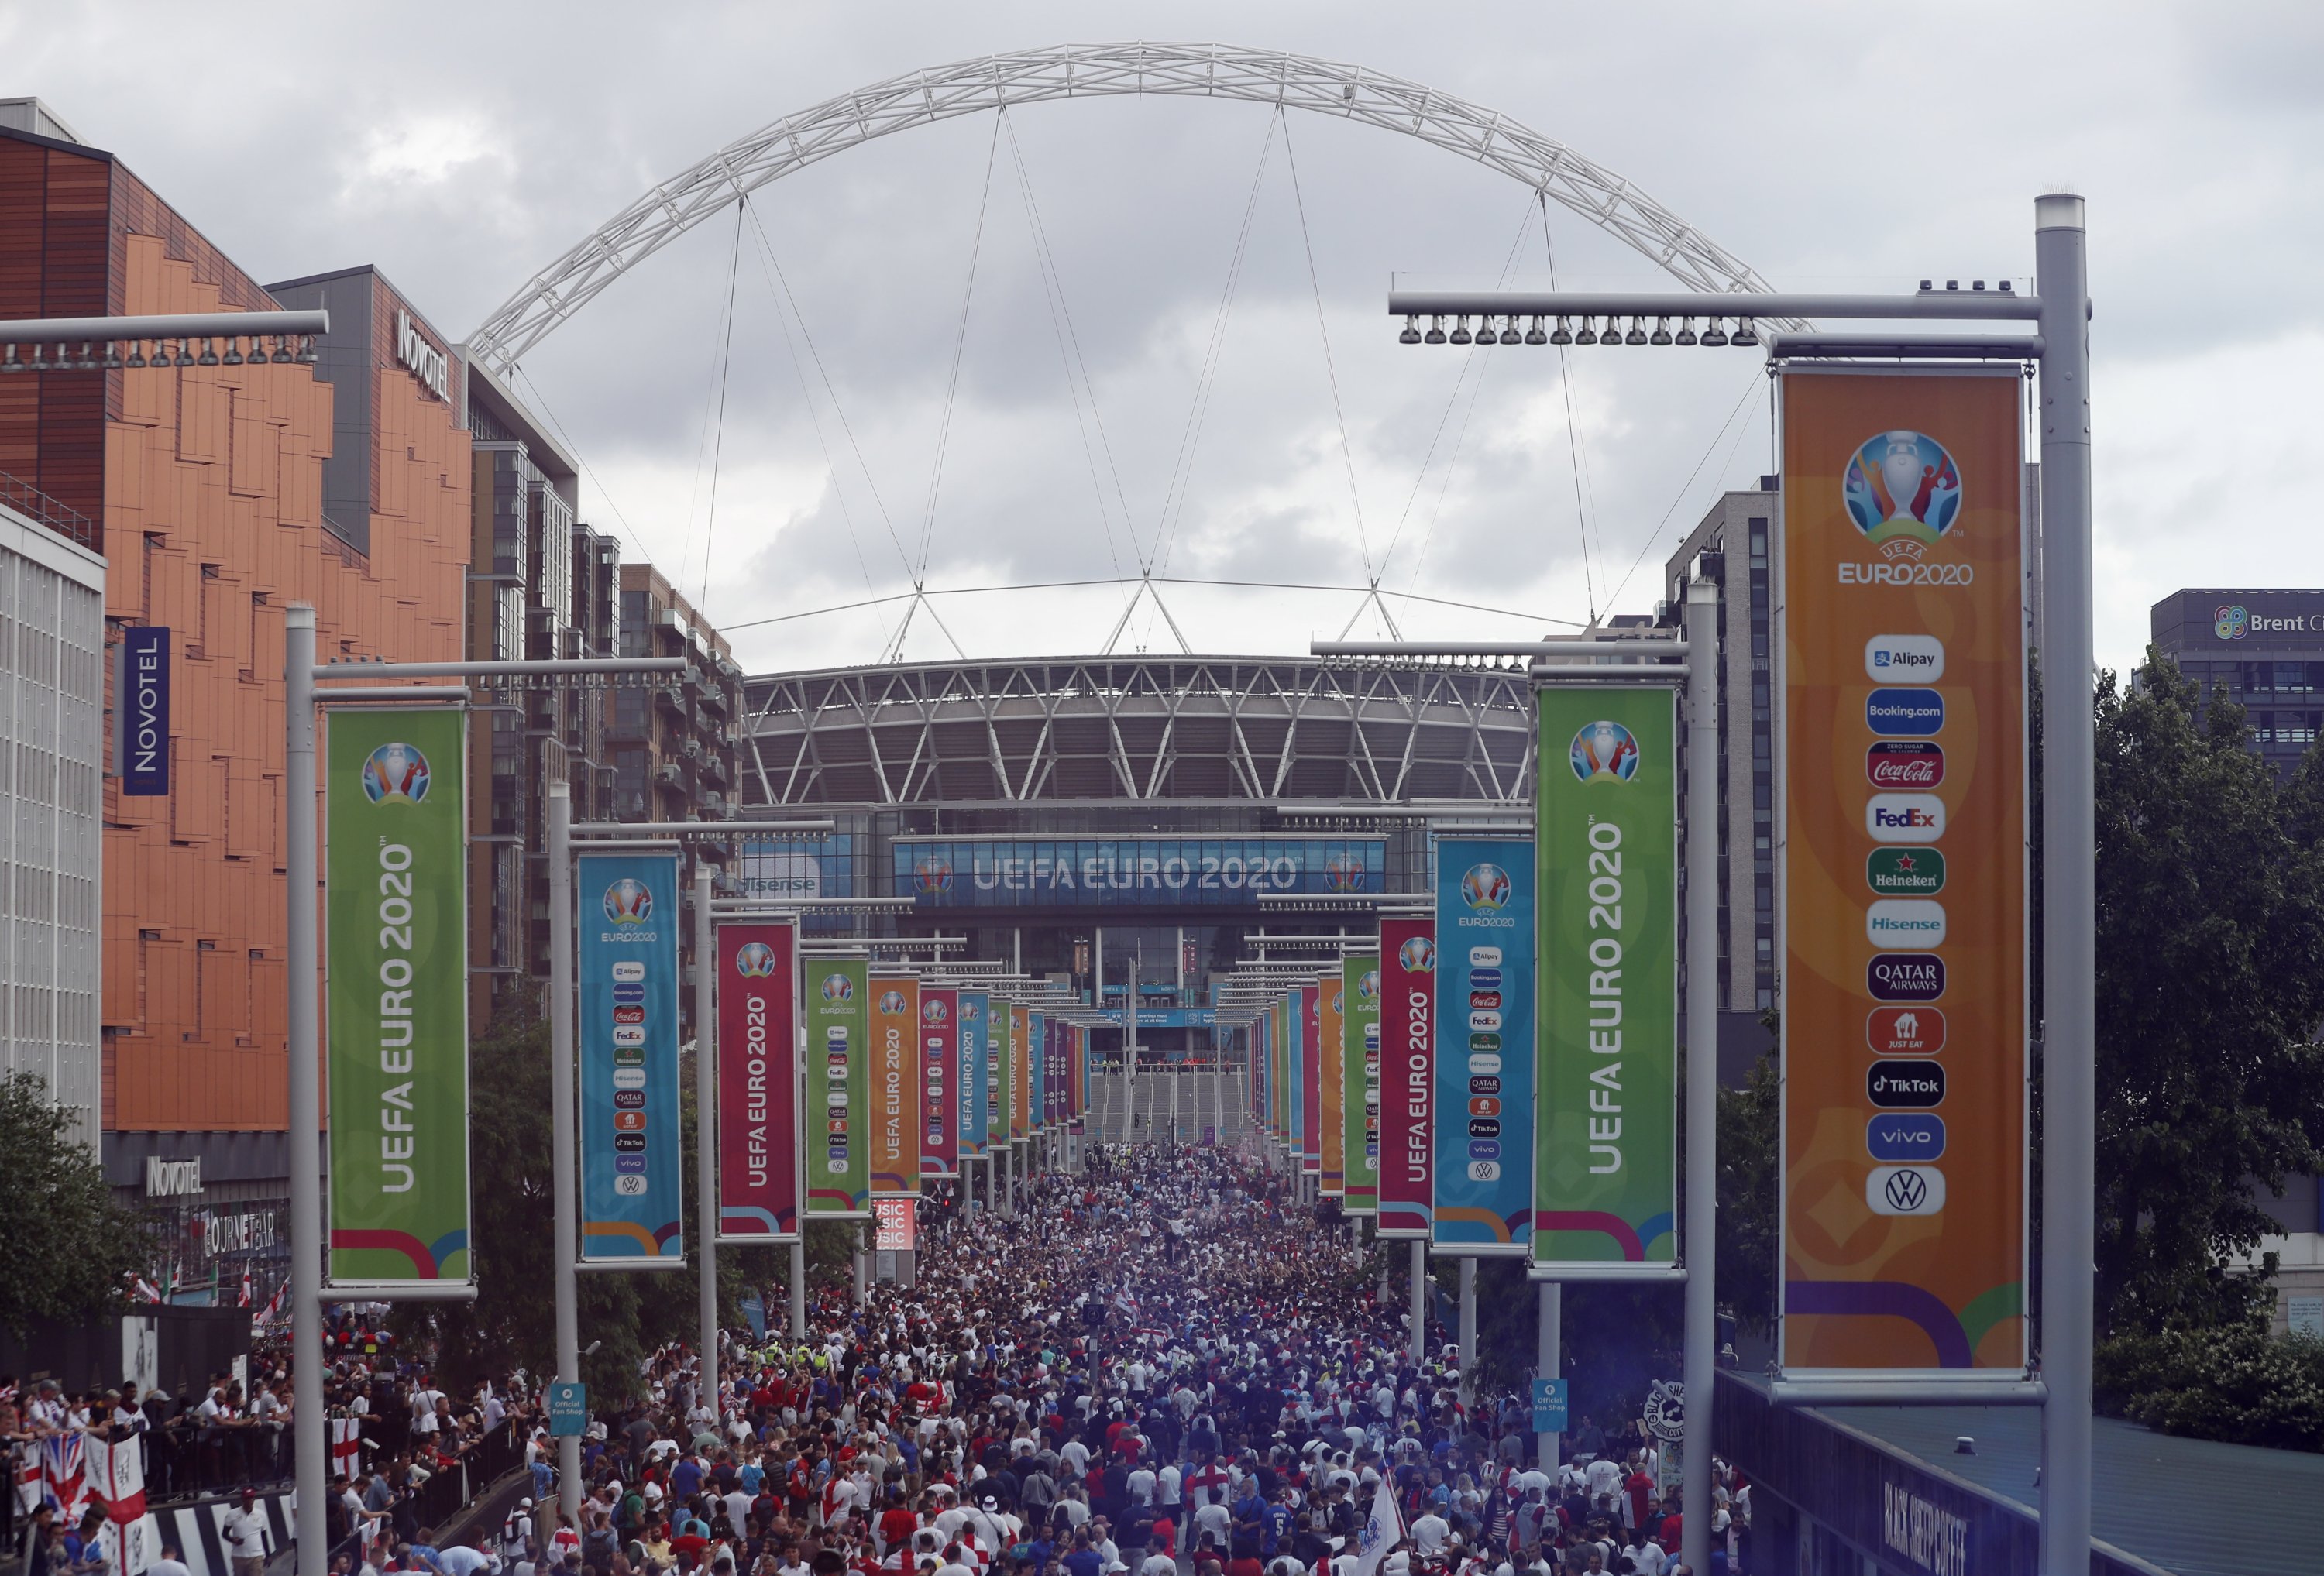 Fans gather outside Wembley ahead of the Euro 2020 final between England and Italy, Wembley Stadium, London, England, July 11, 2021. (Reuters Photo)